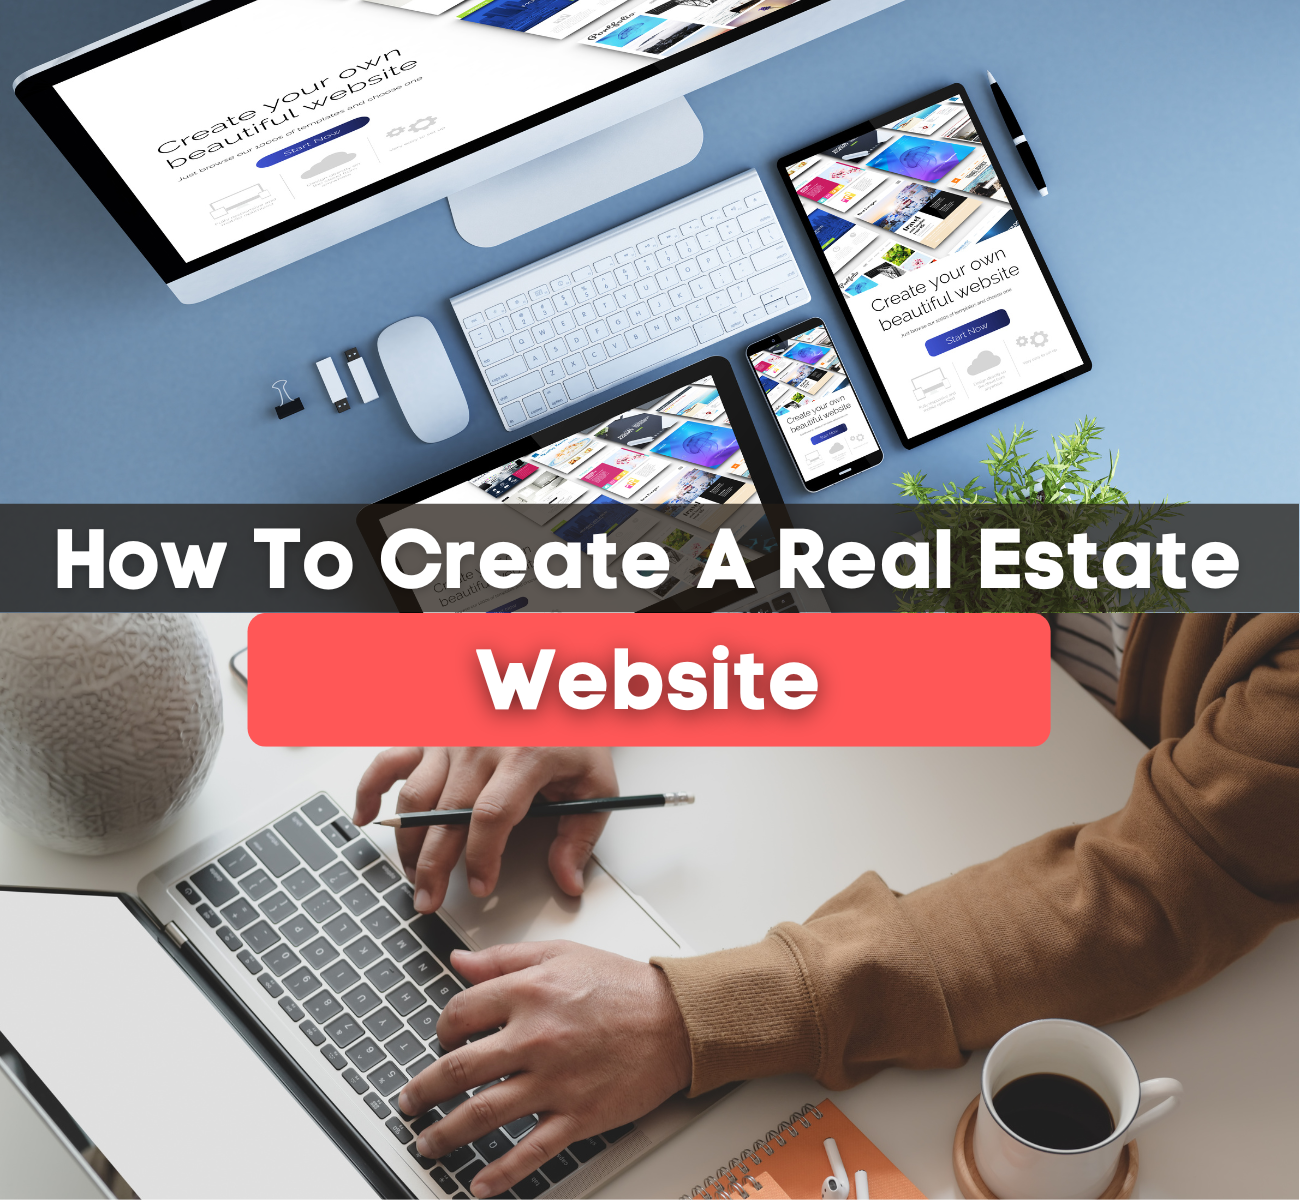 How To Create A Real Estate Website graphic with computer 